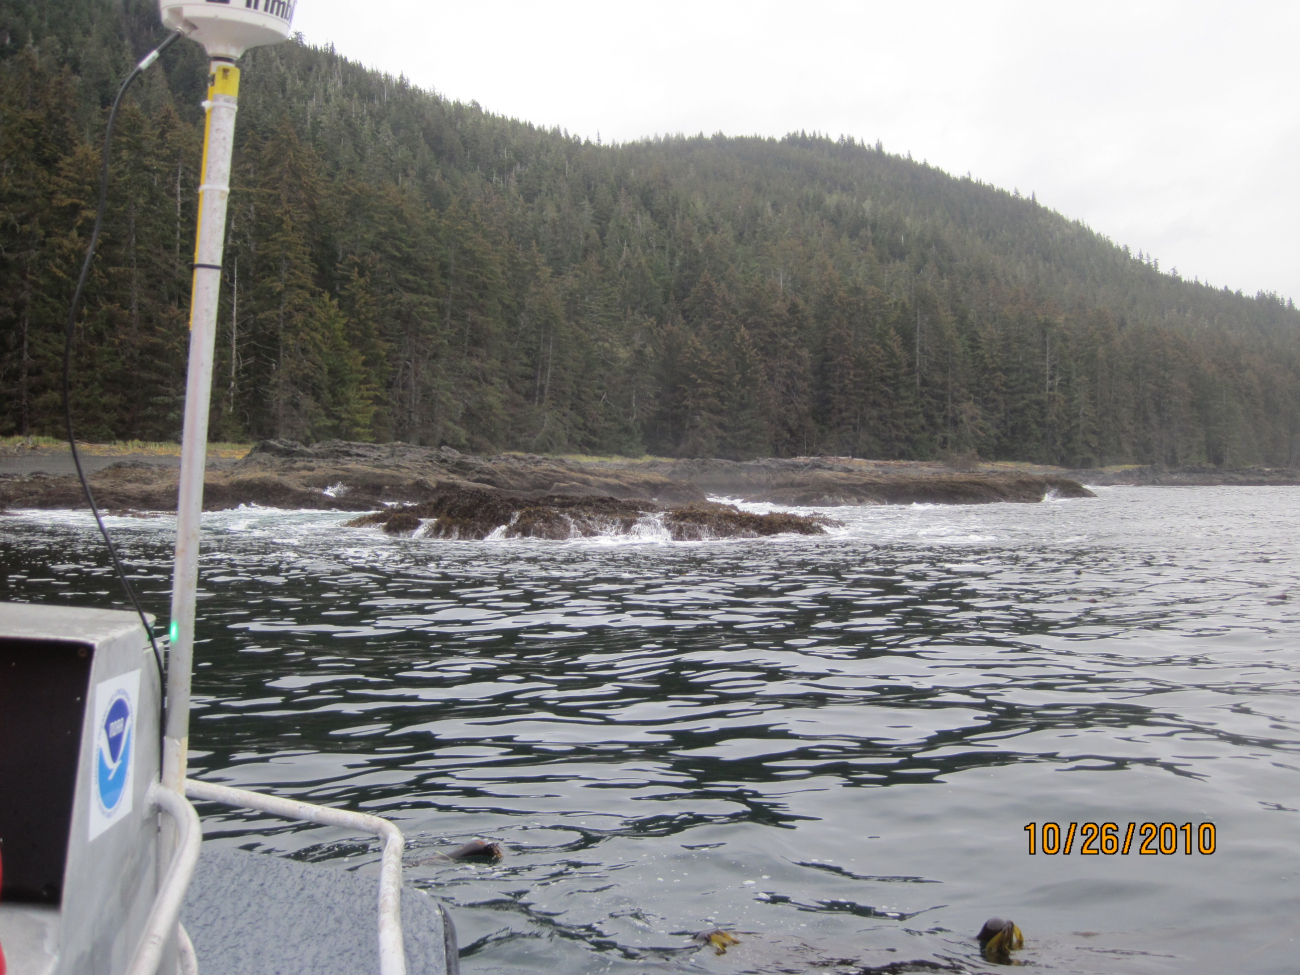 Kelp and offhsore rock noted during shoreline mapping operations